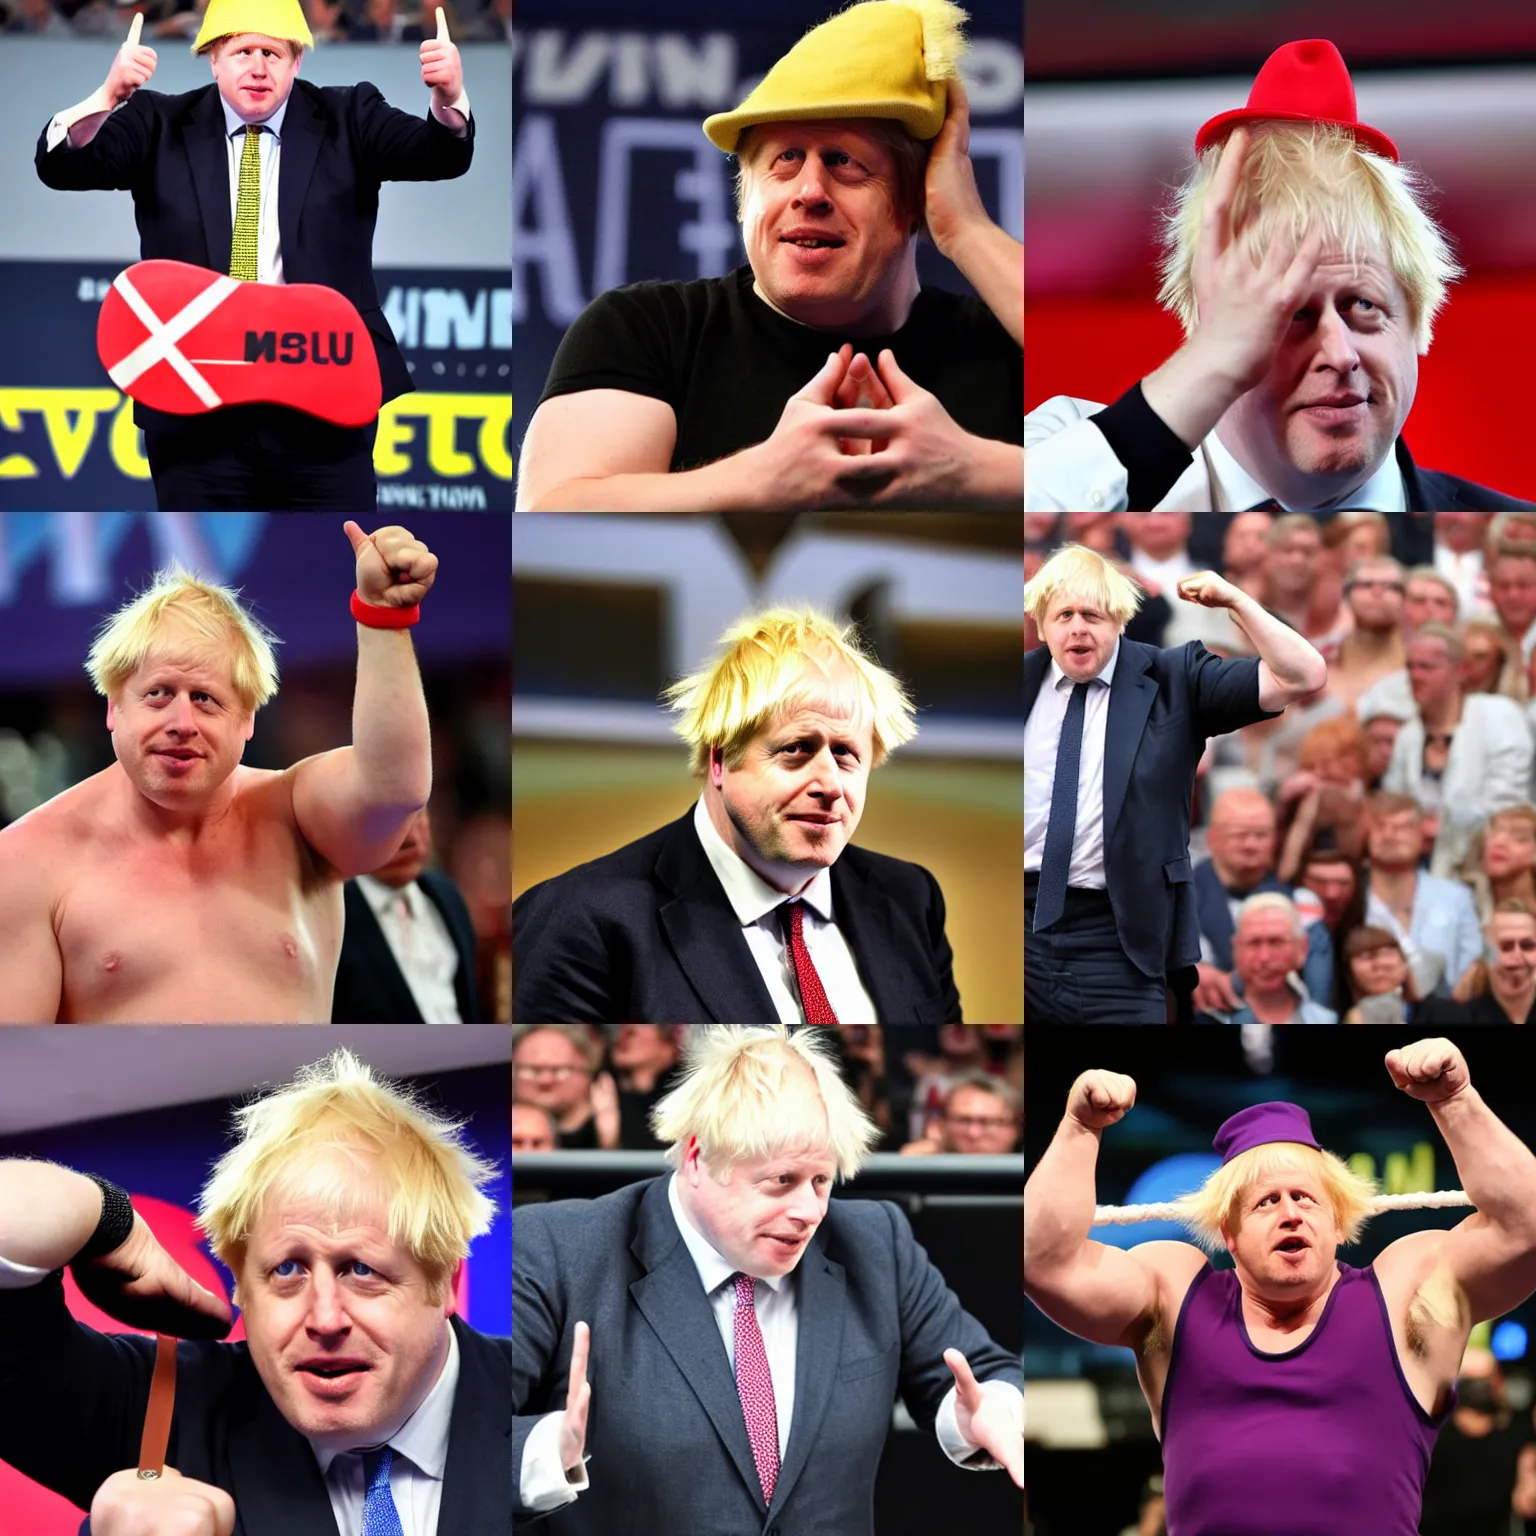 Prompt: boris johnson as a muscular wwe wrestler wearing a hat. he is trying to block the camera view with his hand